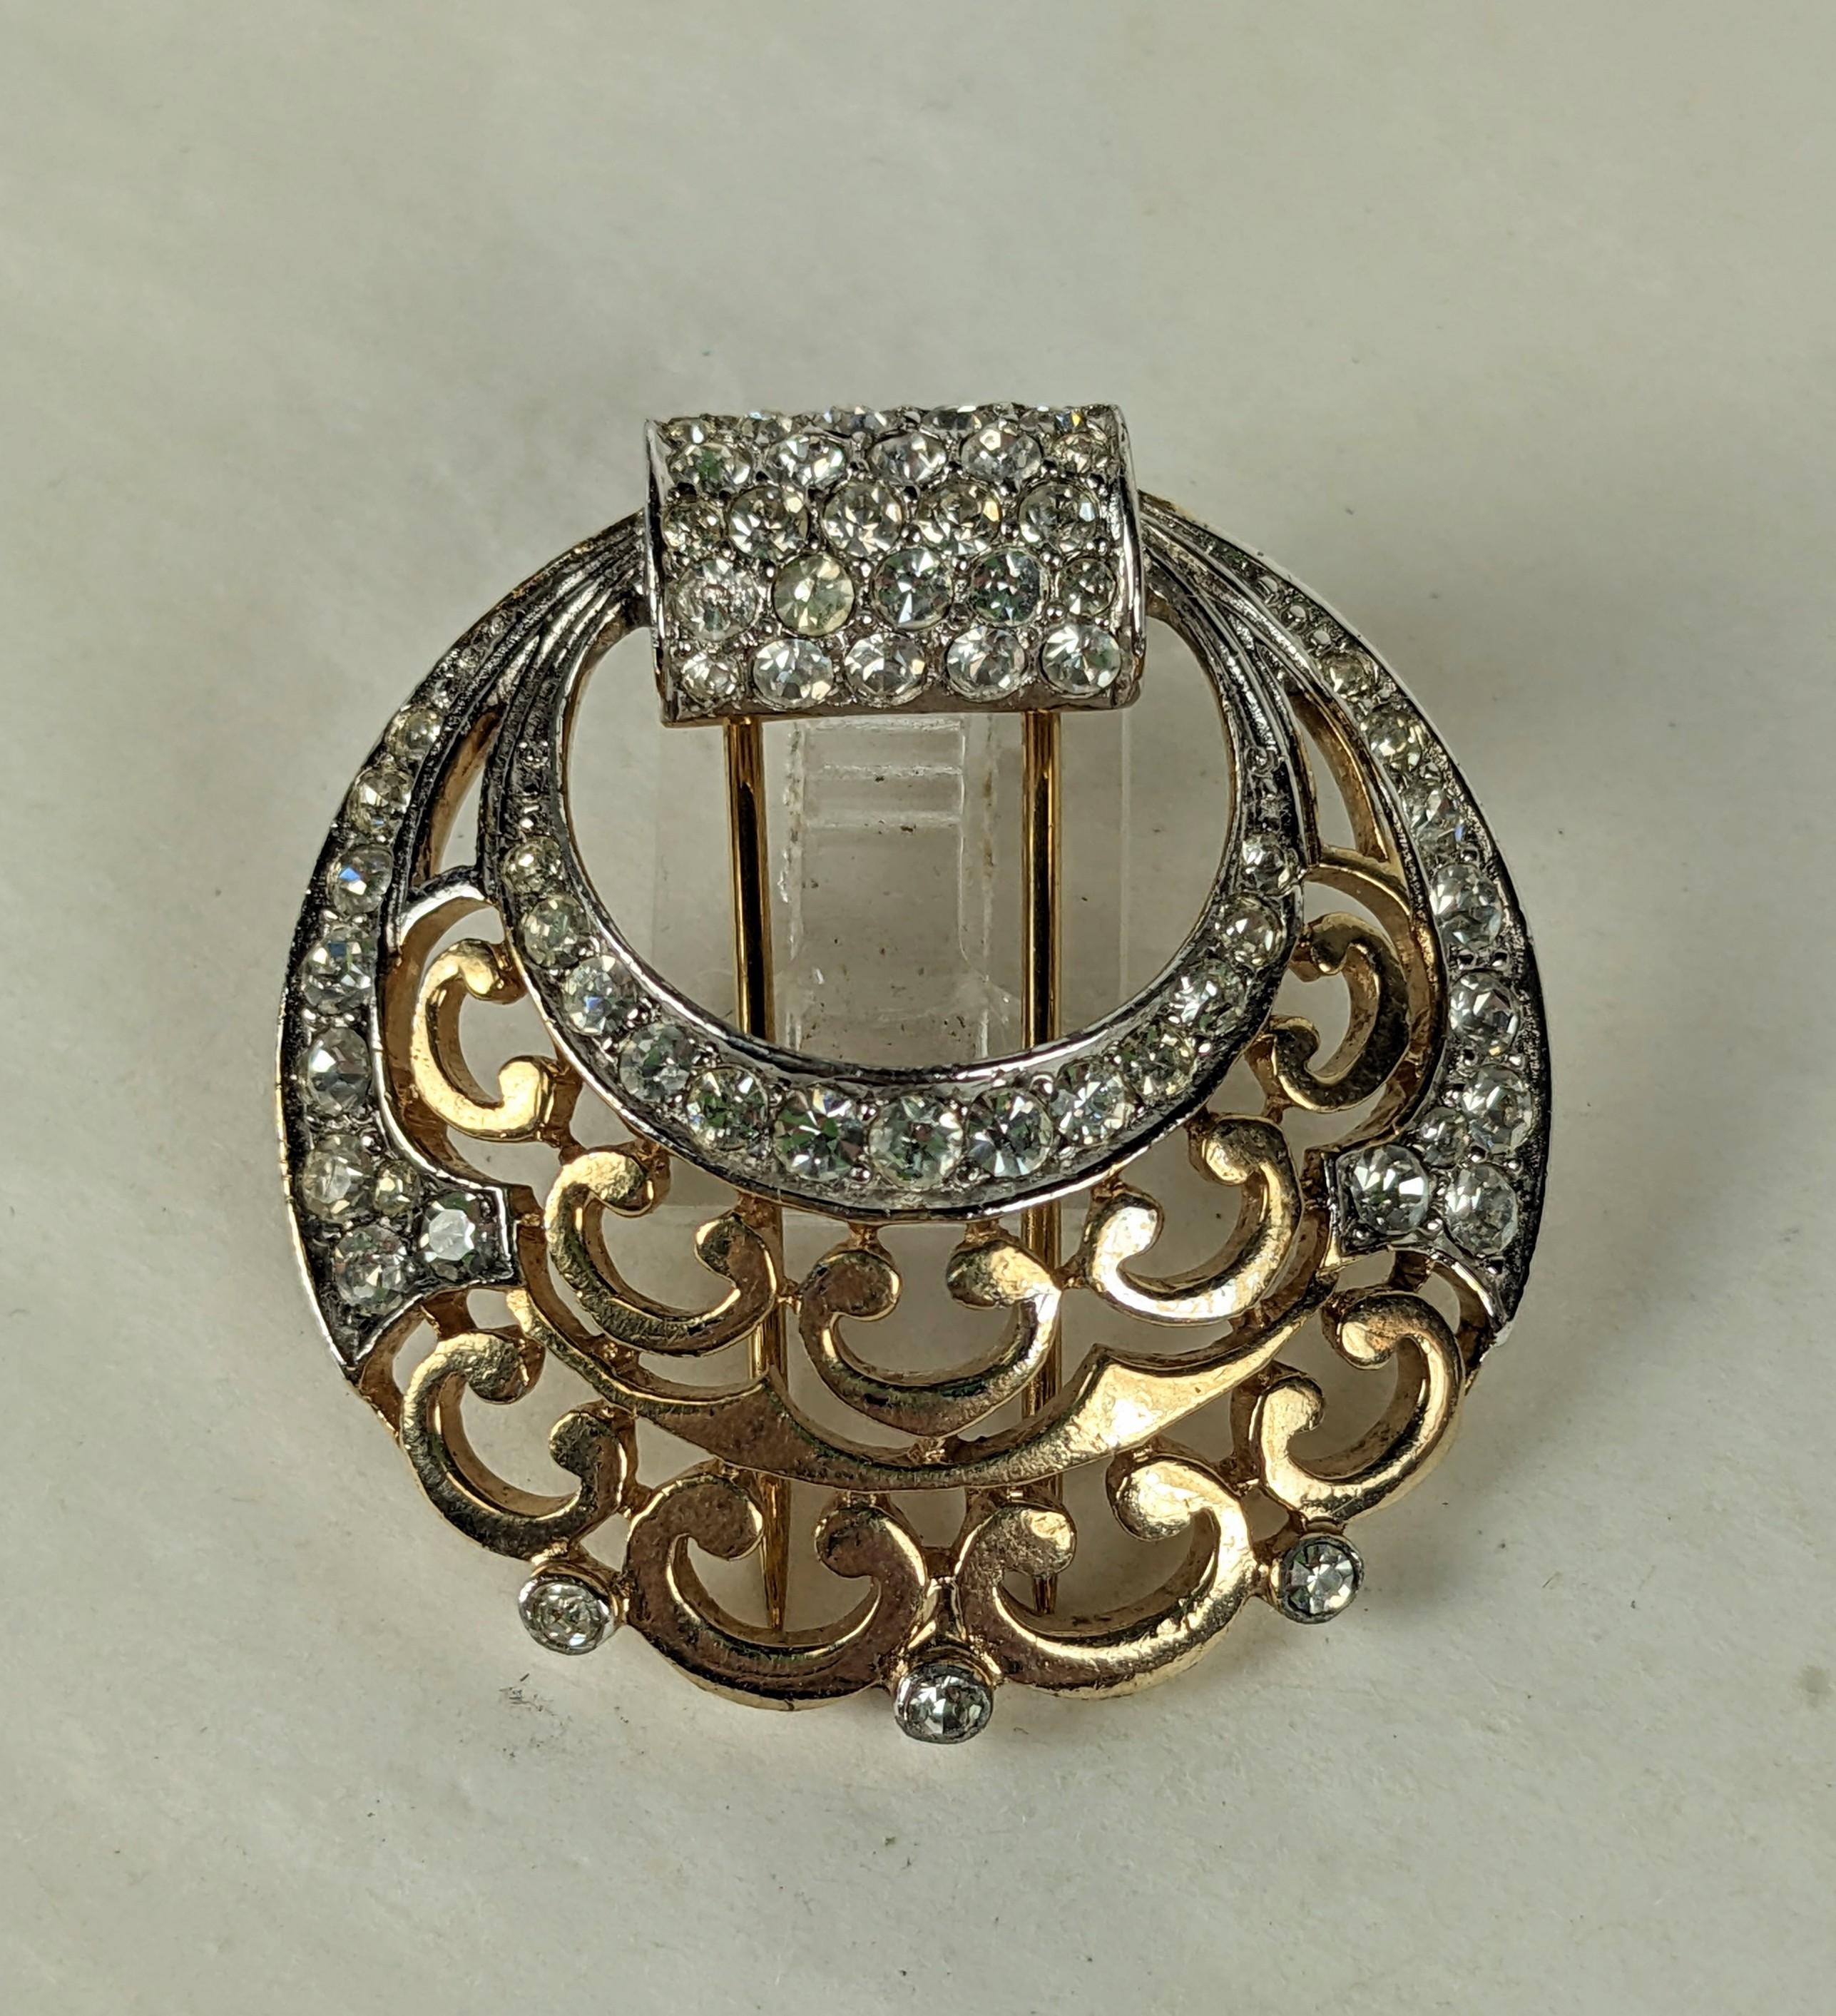 Elegant Marcel Boucher Pierced Retro Clip from the 1940's. Pave sections decorate the scrollwork pierced design. 
Early MB hallmark. 1.5